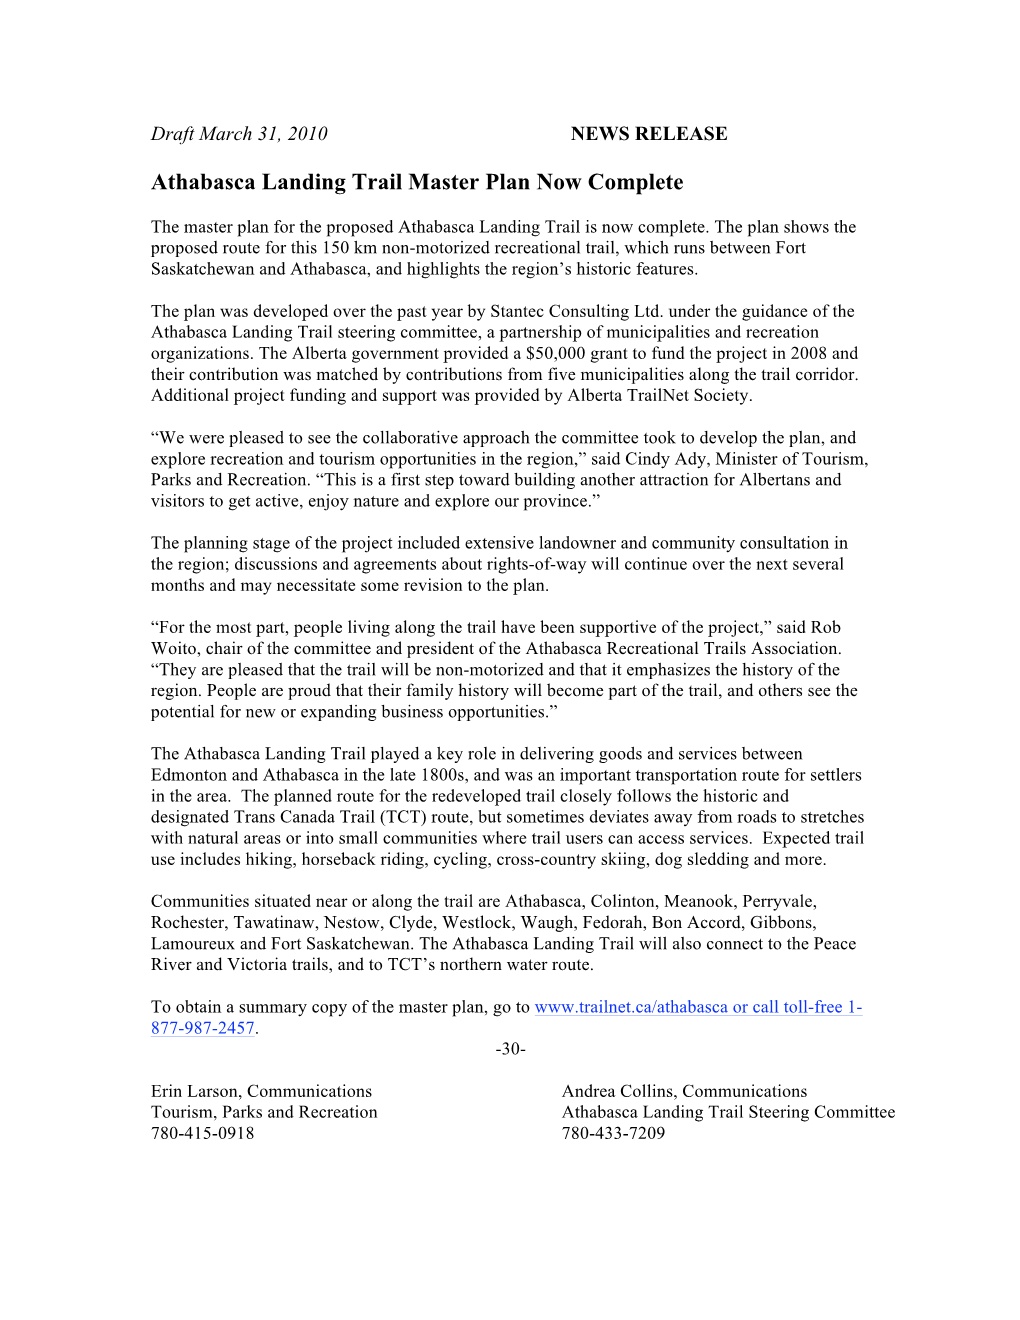 Athabasca Landing Trail Master Plan Now Complete